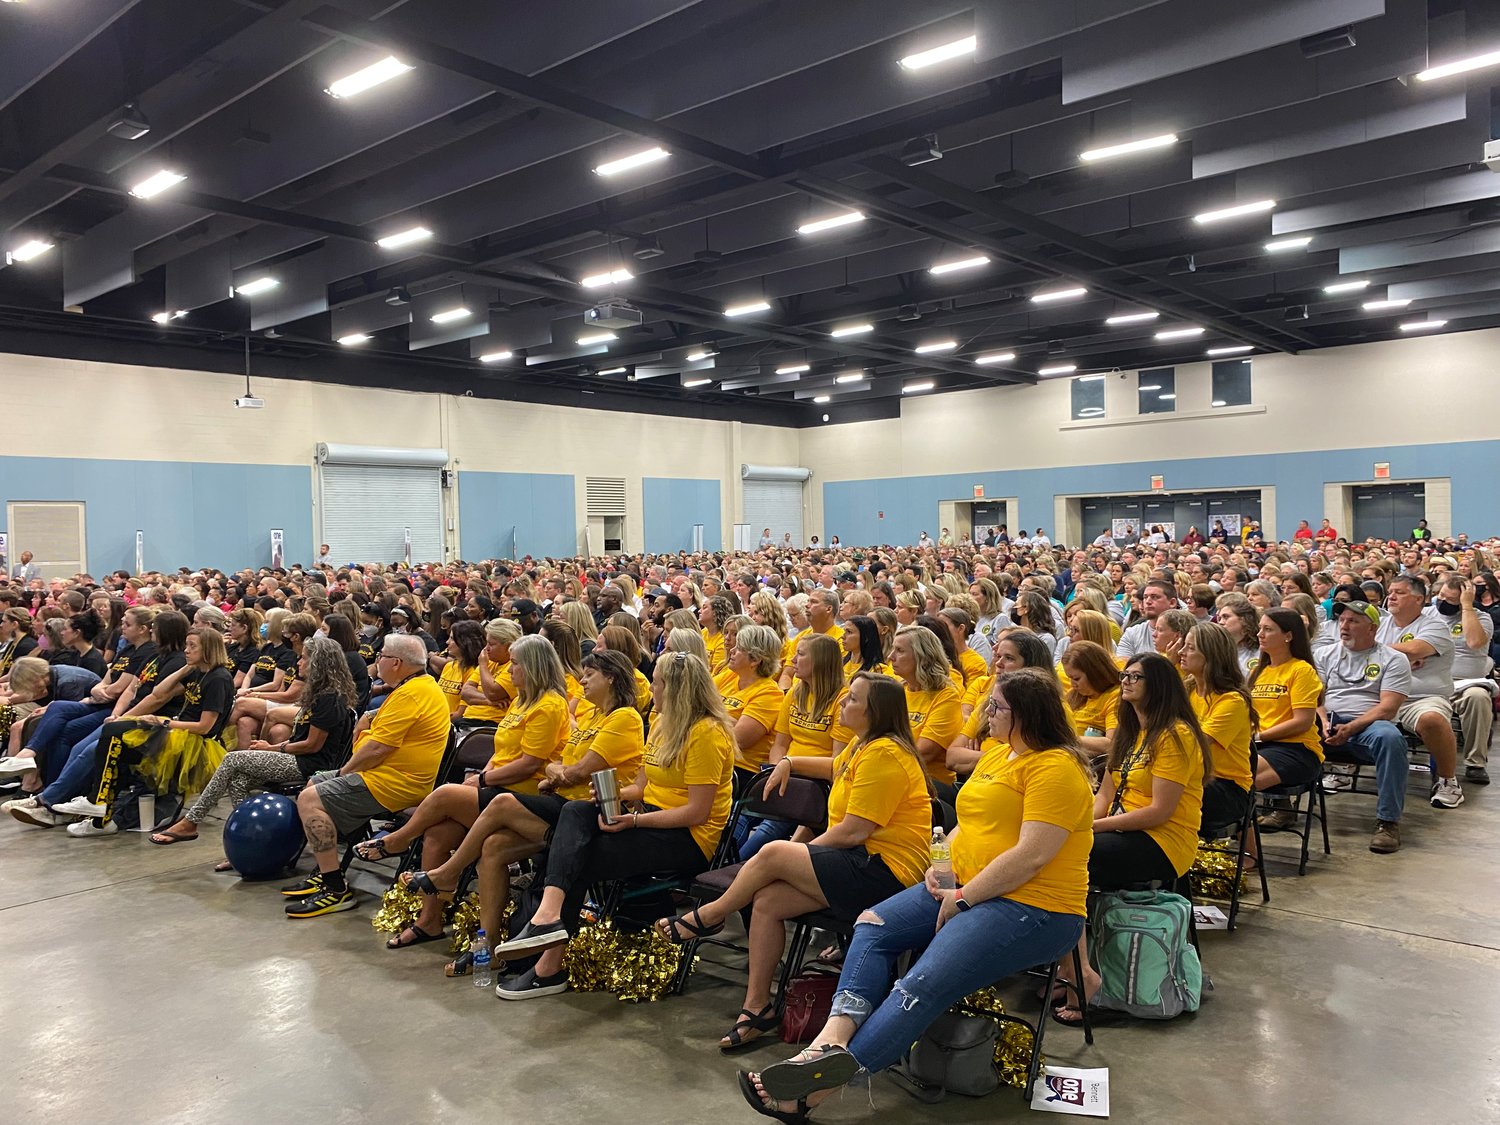 CCS employees hear presentations from Superintendent Dr. Anthony Jackson at 2022 Convocation at the Wicker Center in Sanford on Wednesday. The superintendent emphasized the importance of the new One Chatham Strategic Plan.